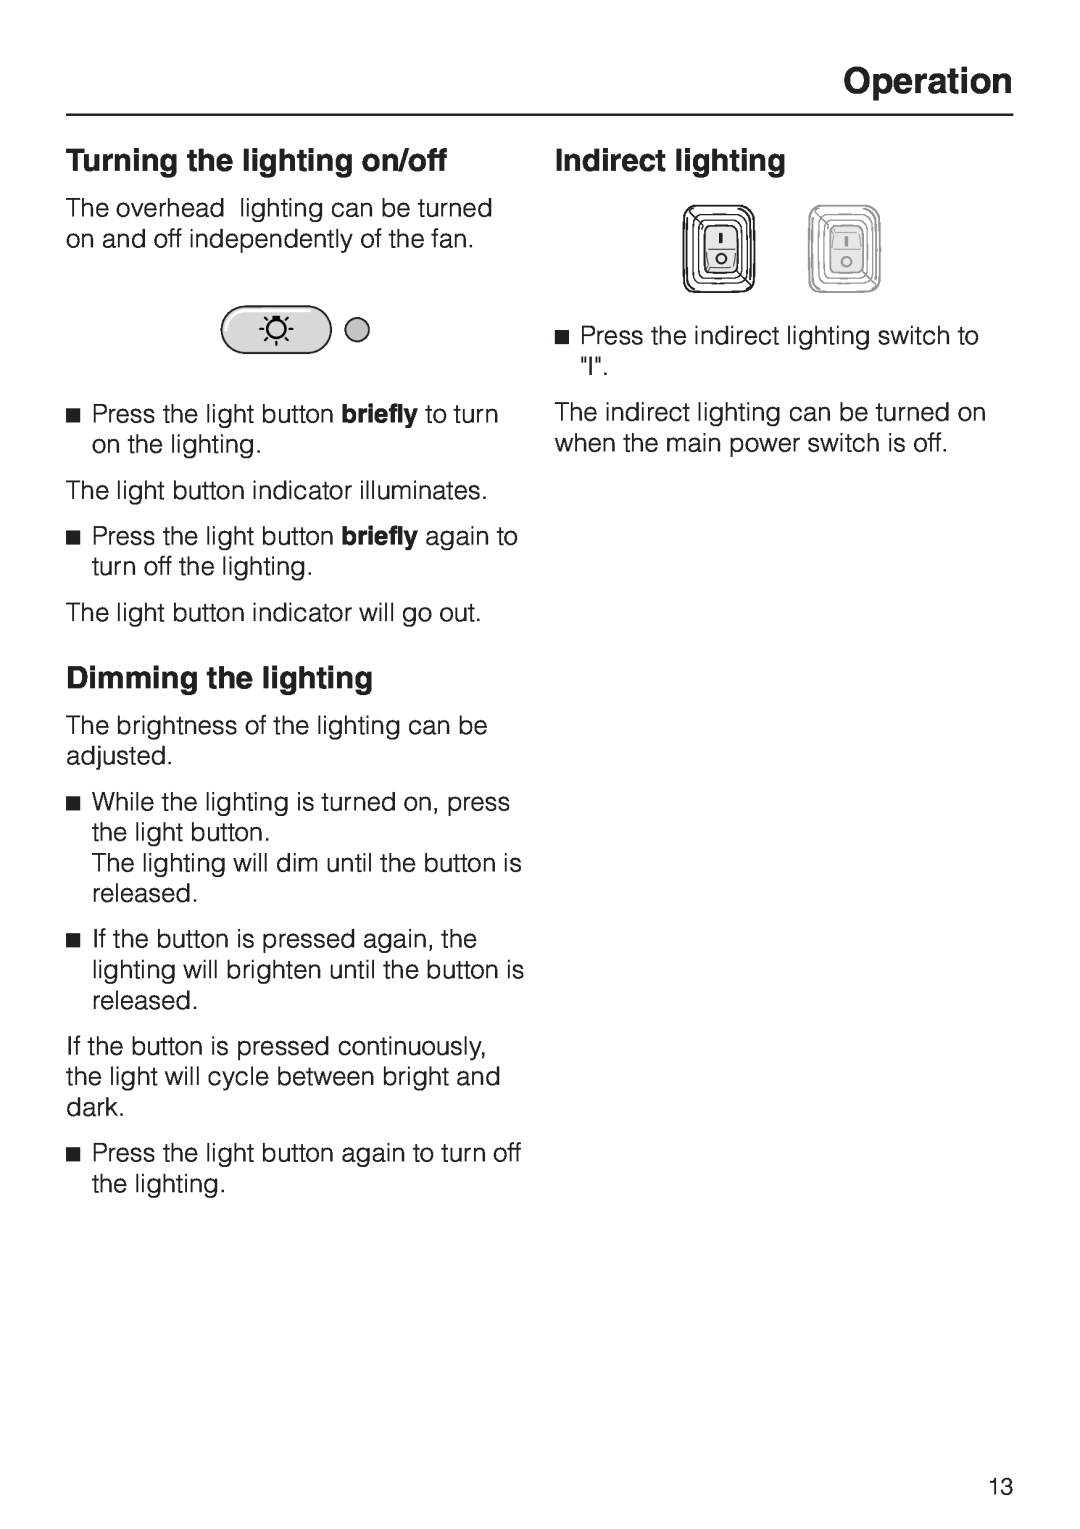 Miele DA279-3 installation instructions Turning the lighting on/off, Indirect lighting, Dimming the lighting, Operation 